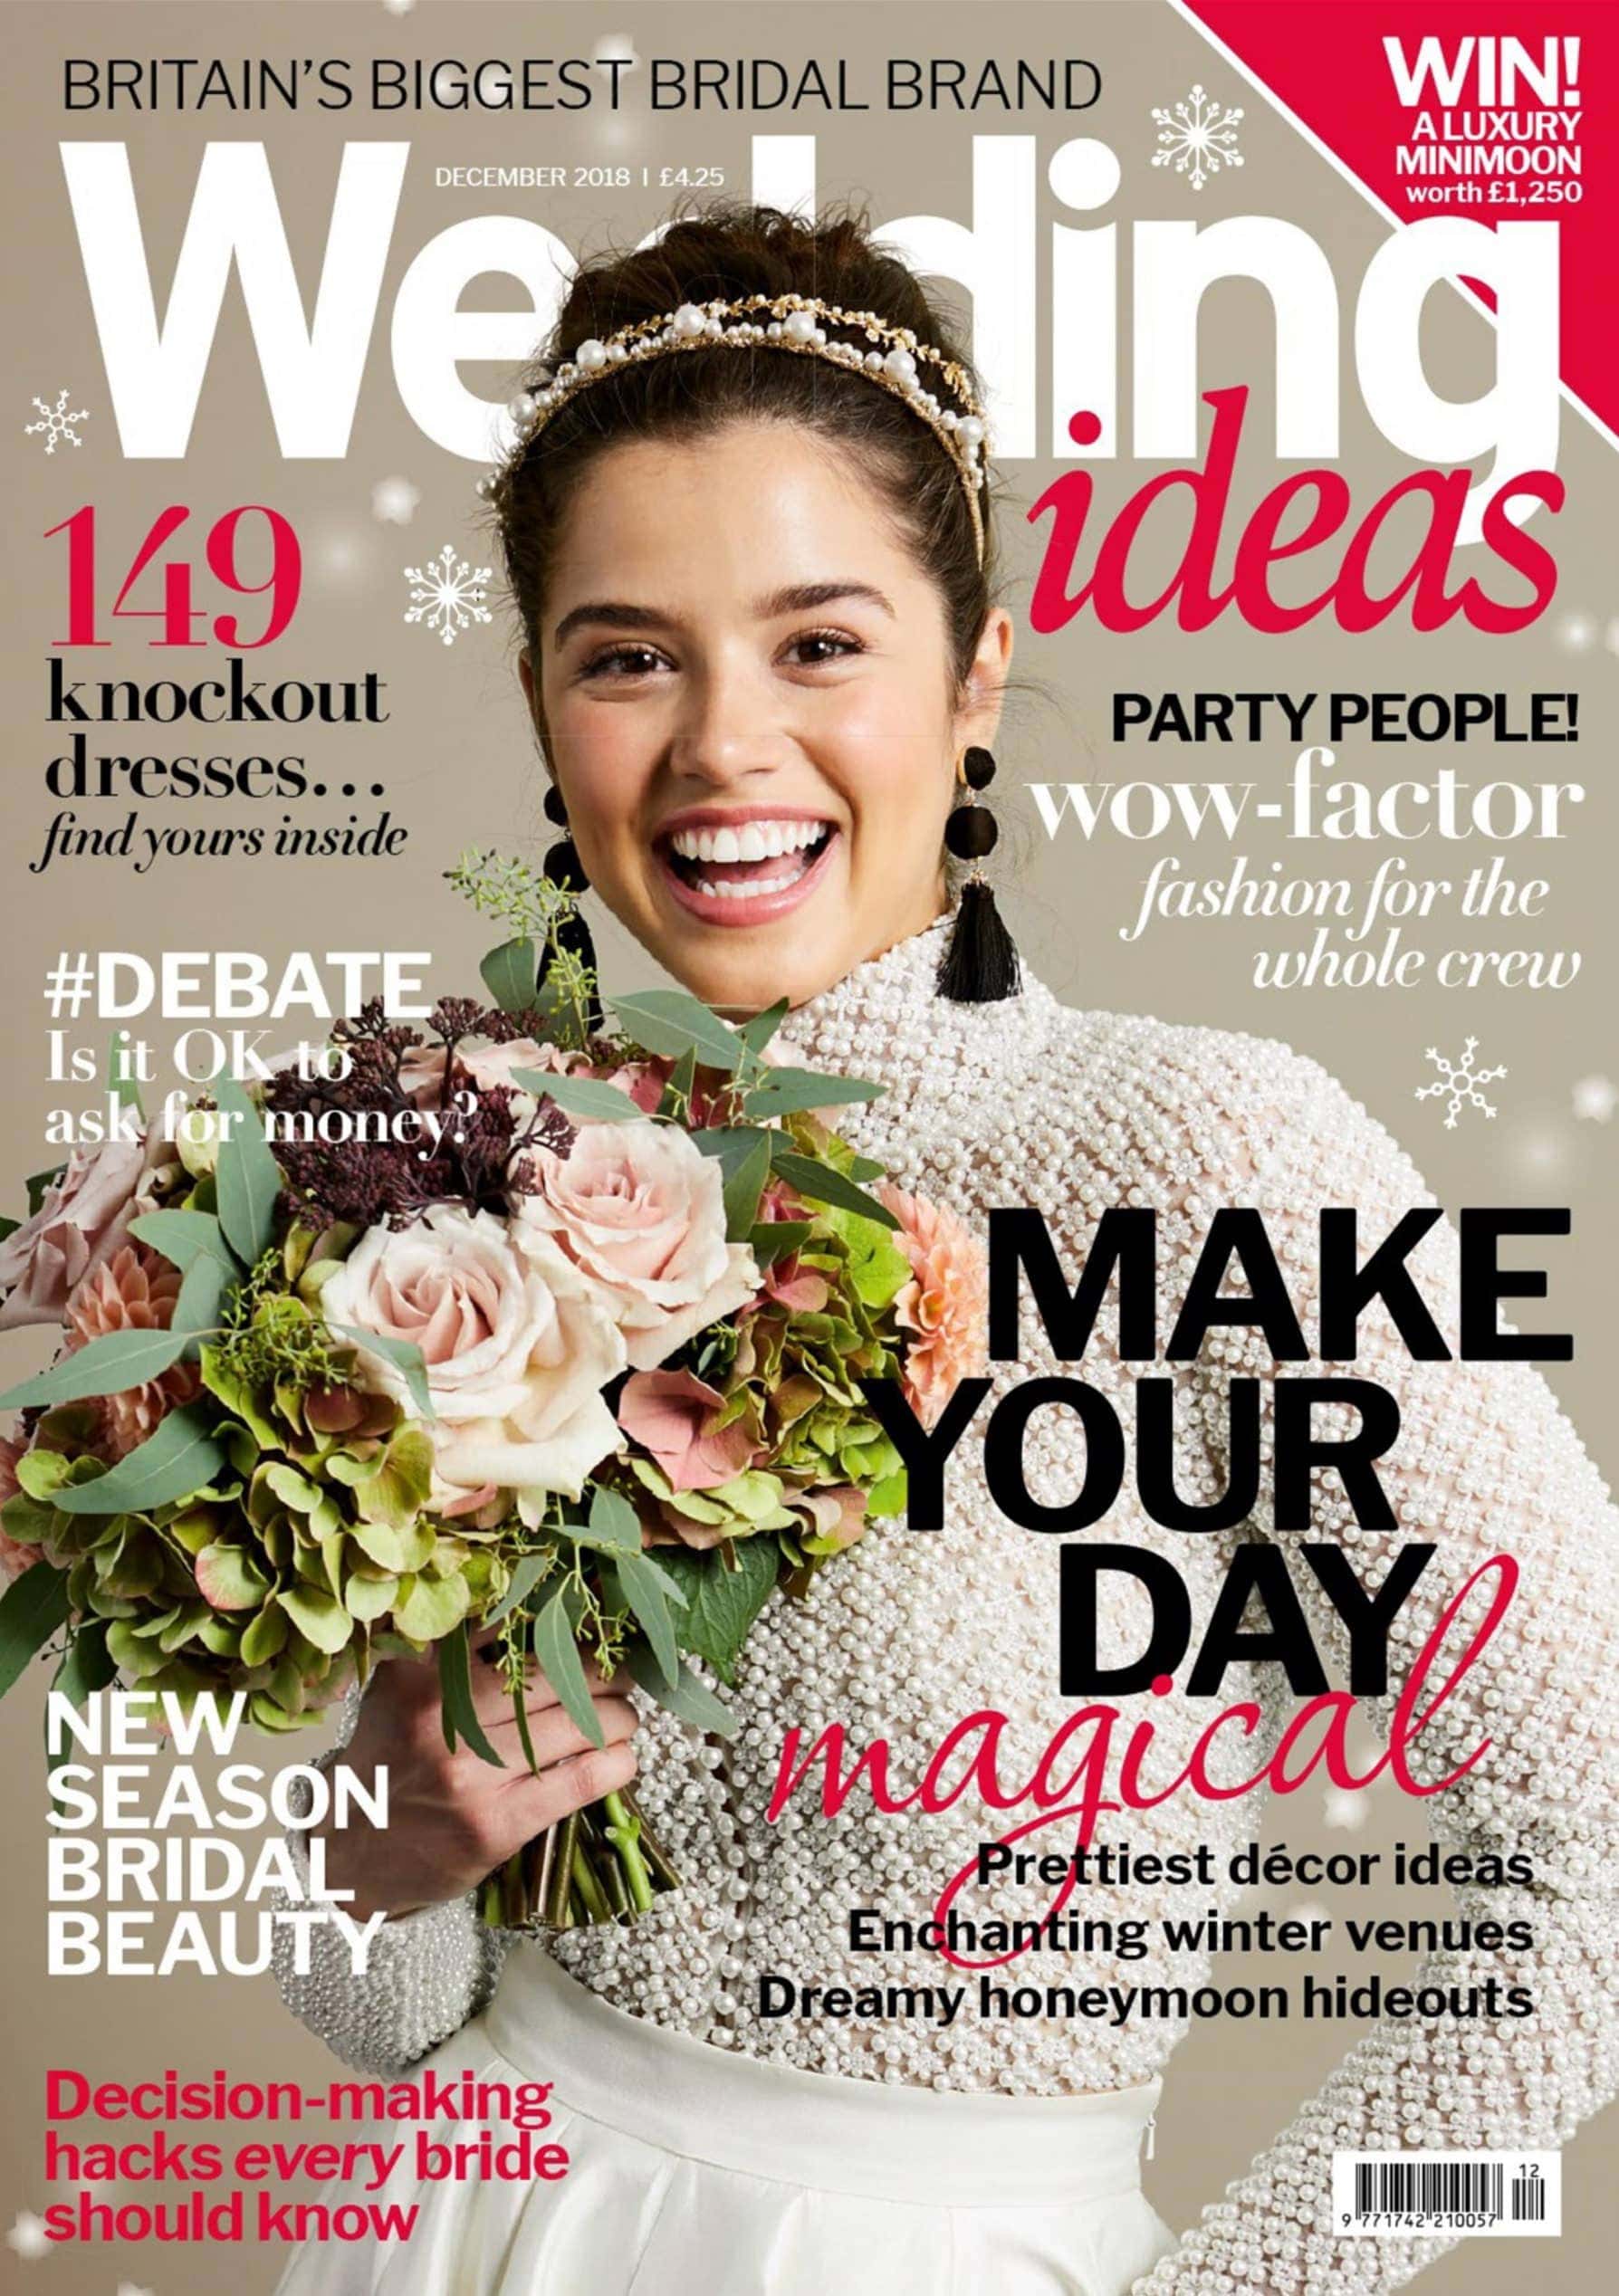 Wedding Ideas magazine feature with Murray Clarke Photography.